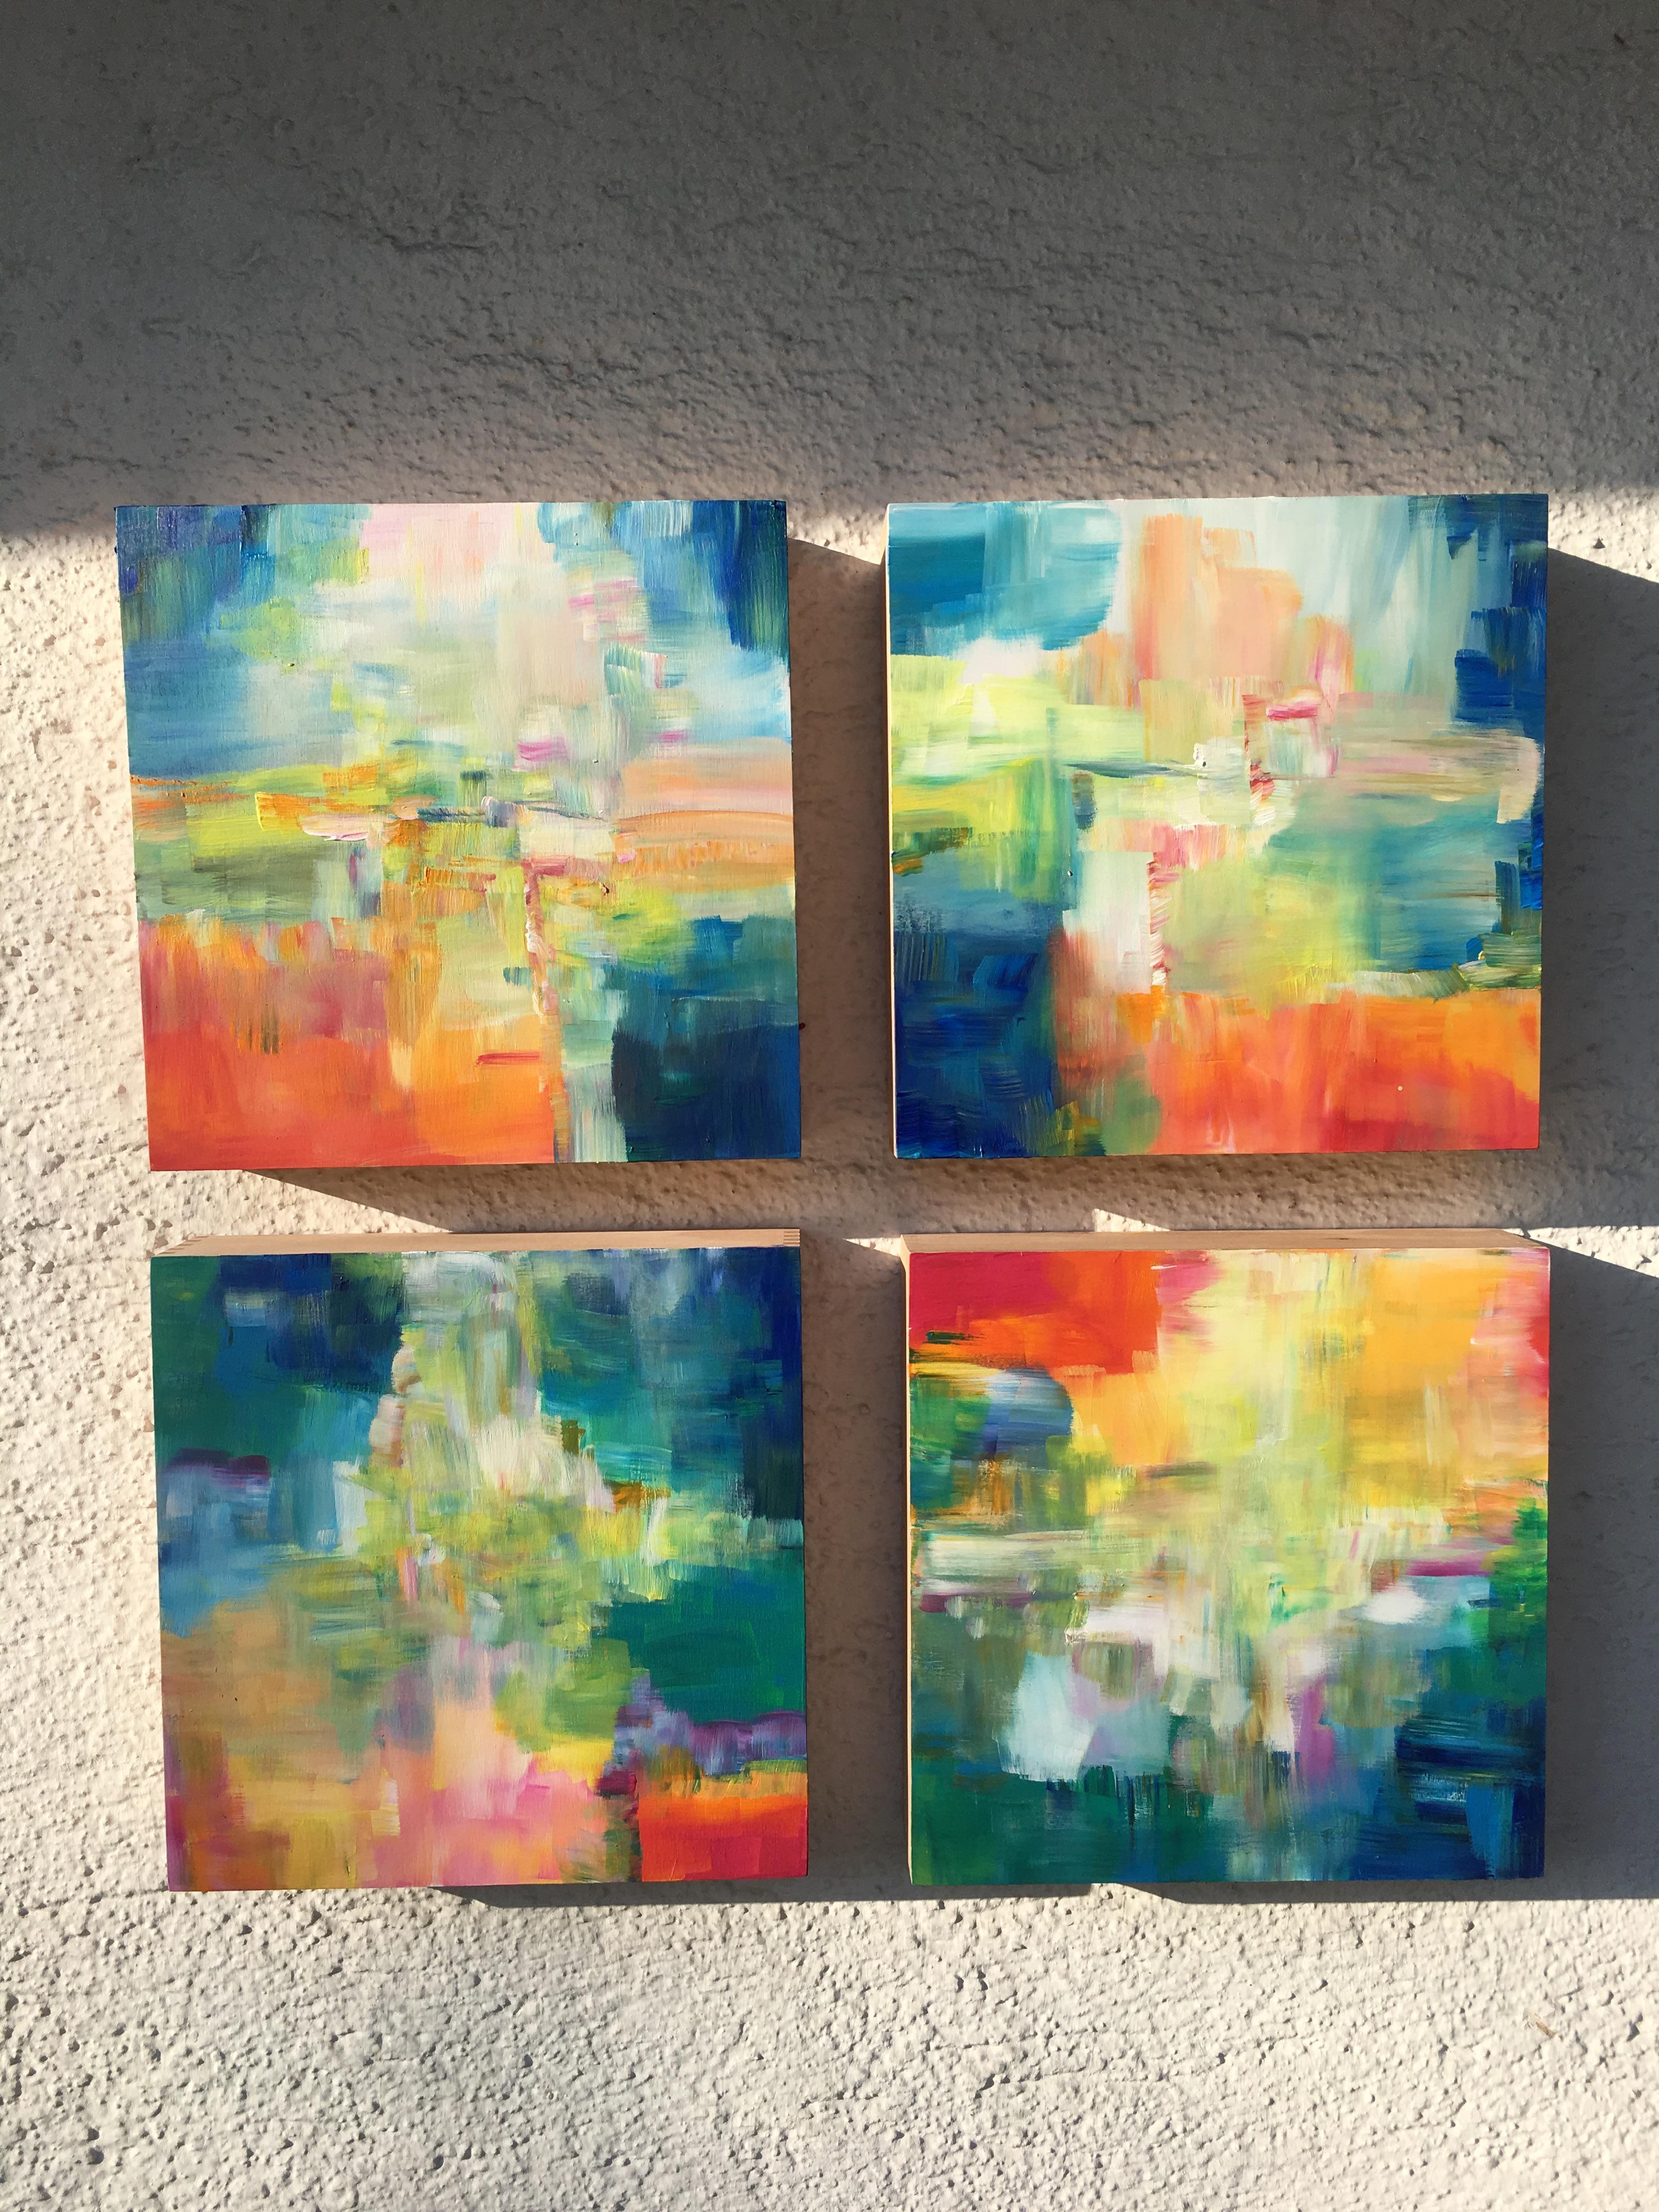 Sun and Light by Katharina Husslein - Four abstract paintings on wood 7